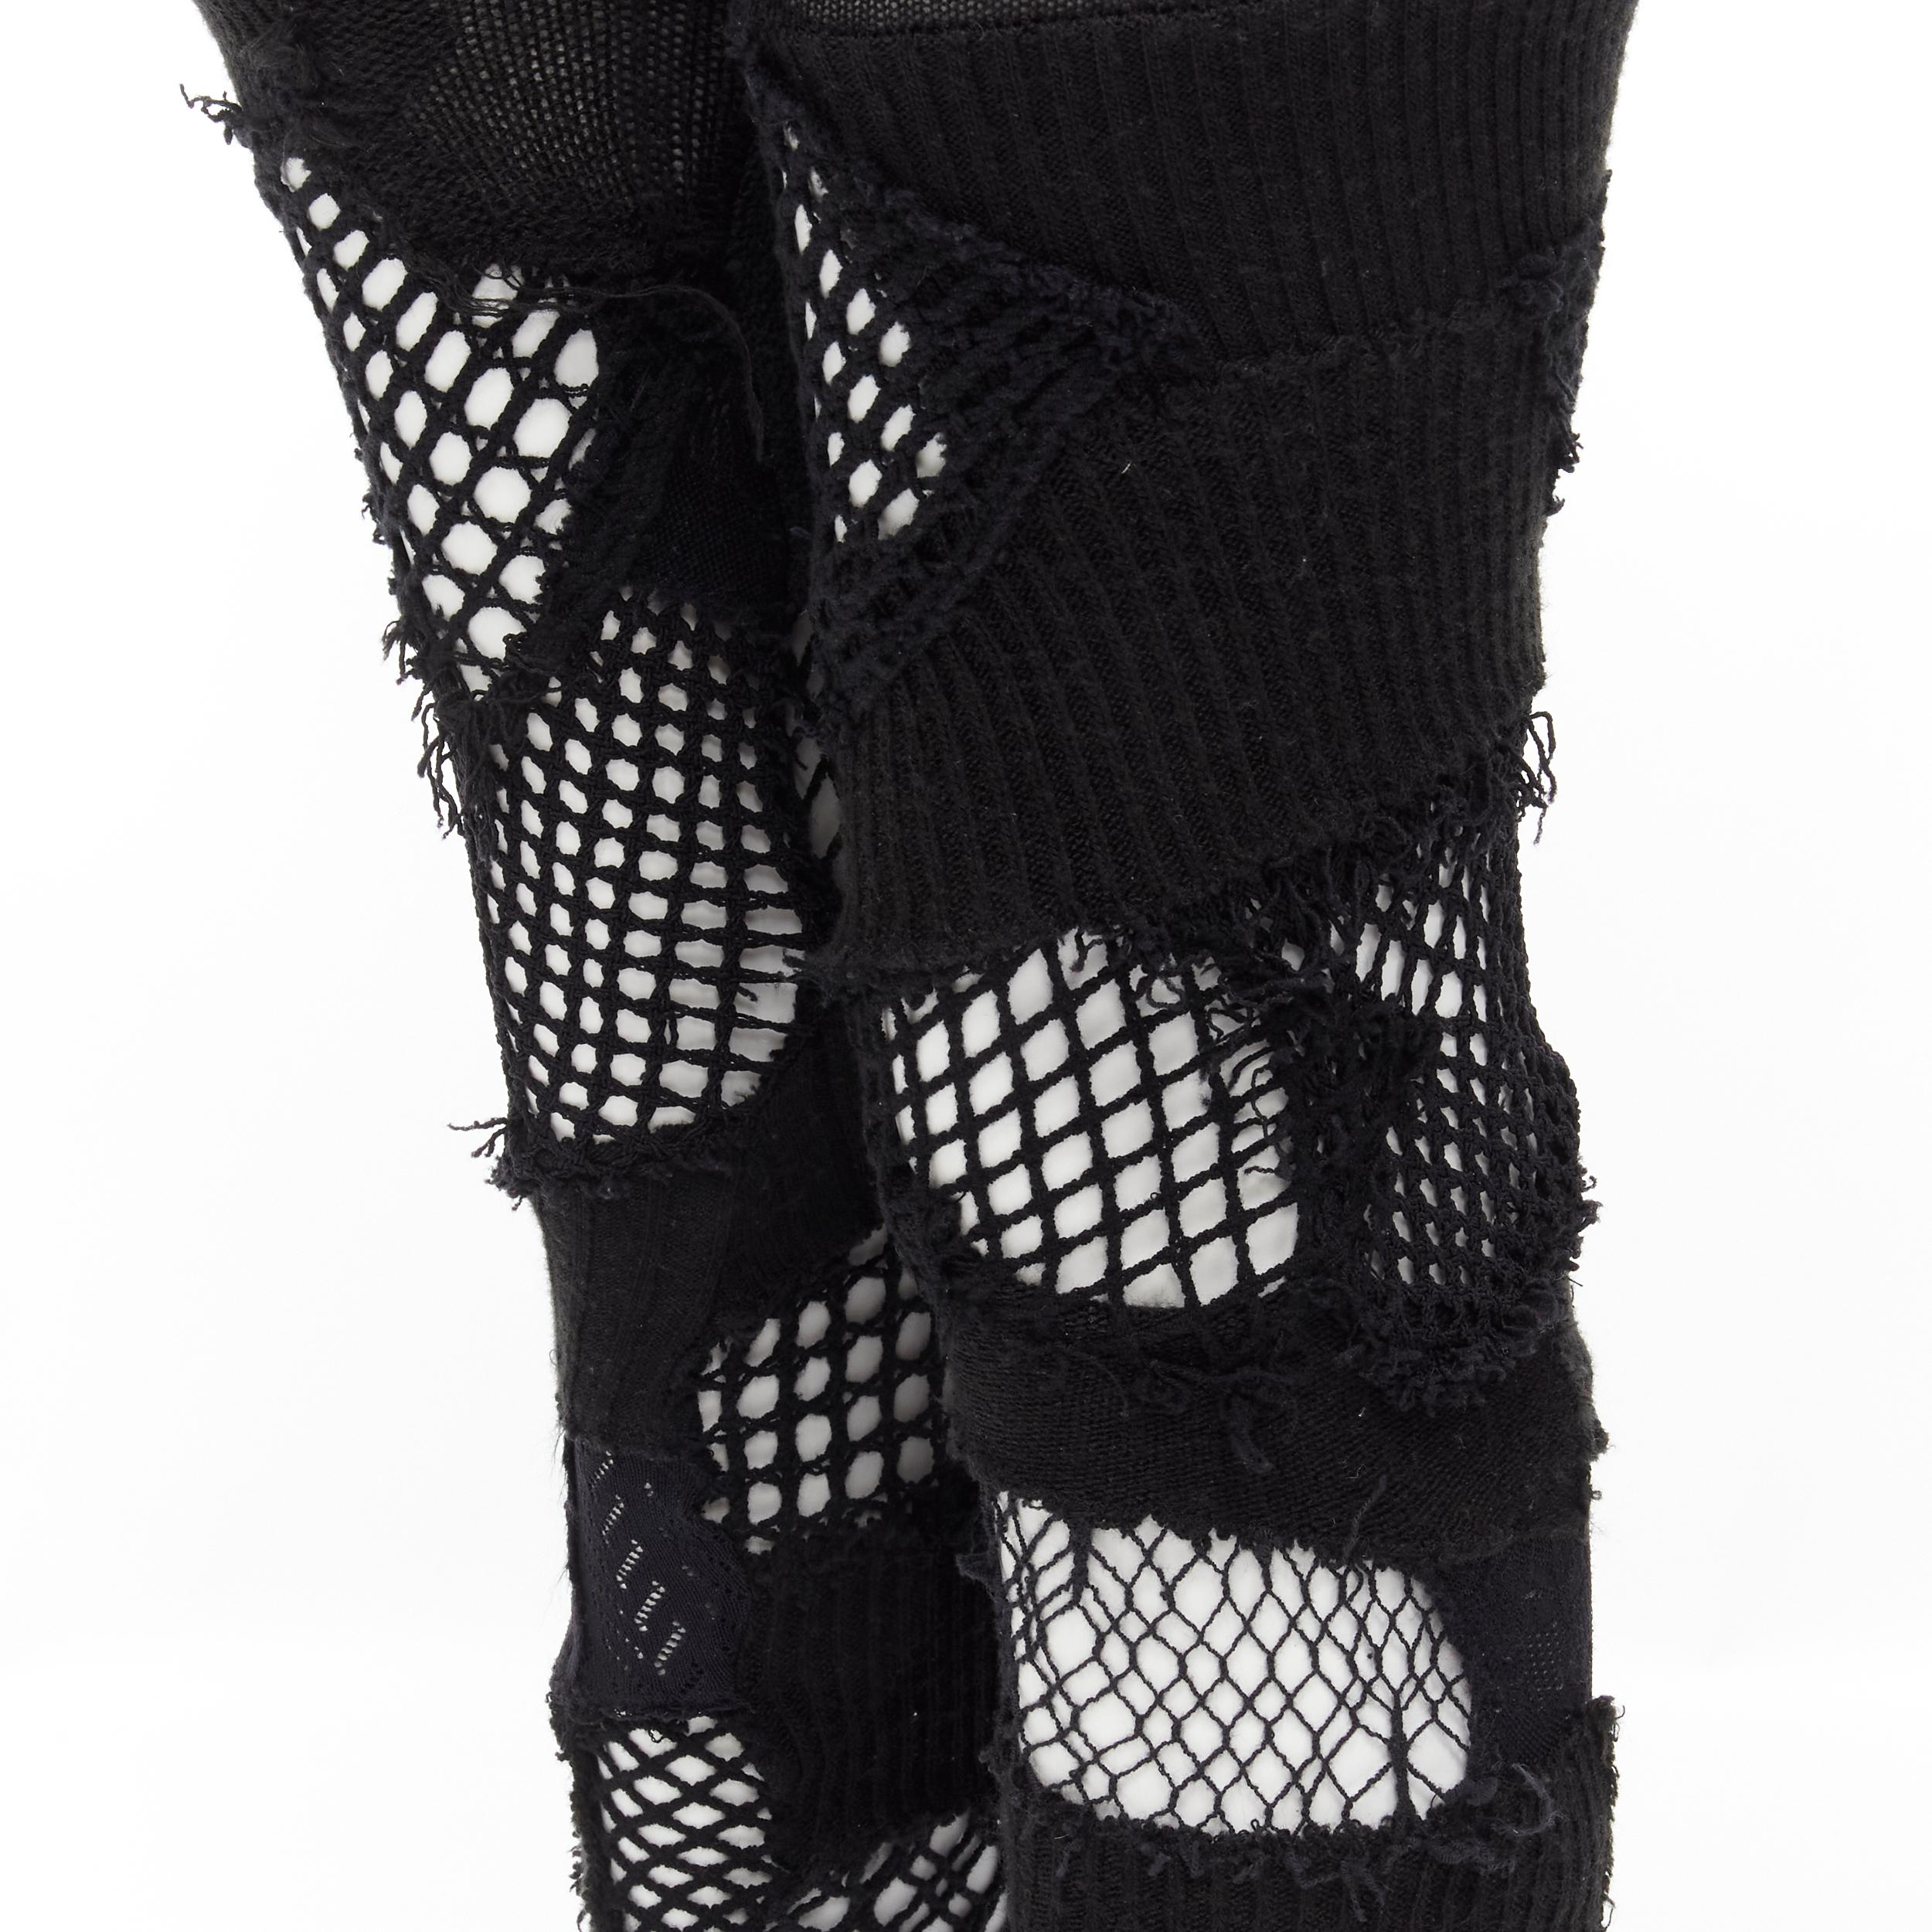 runway JUNYA WATANABE black fishnet deconstructed tights leggings pants S \
Reference: TGAS/B02252 
Brand: Junya Watanabe 
Designer: Junya Watanabe 
Collection: AD2006 Runway 
Material: Wool 
Color: Black 
Pattern: Solid 
Extra Detail: Knitted